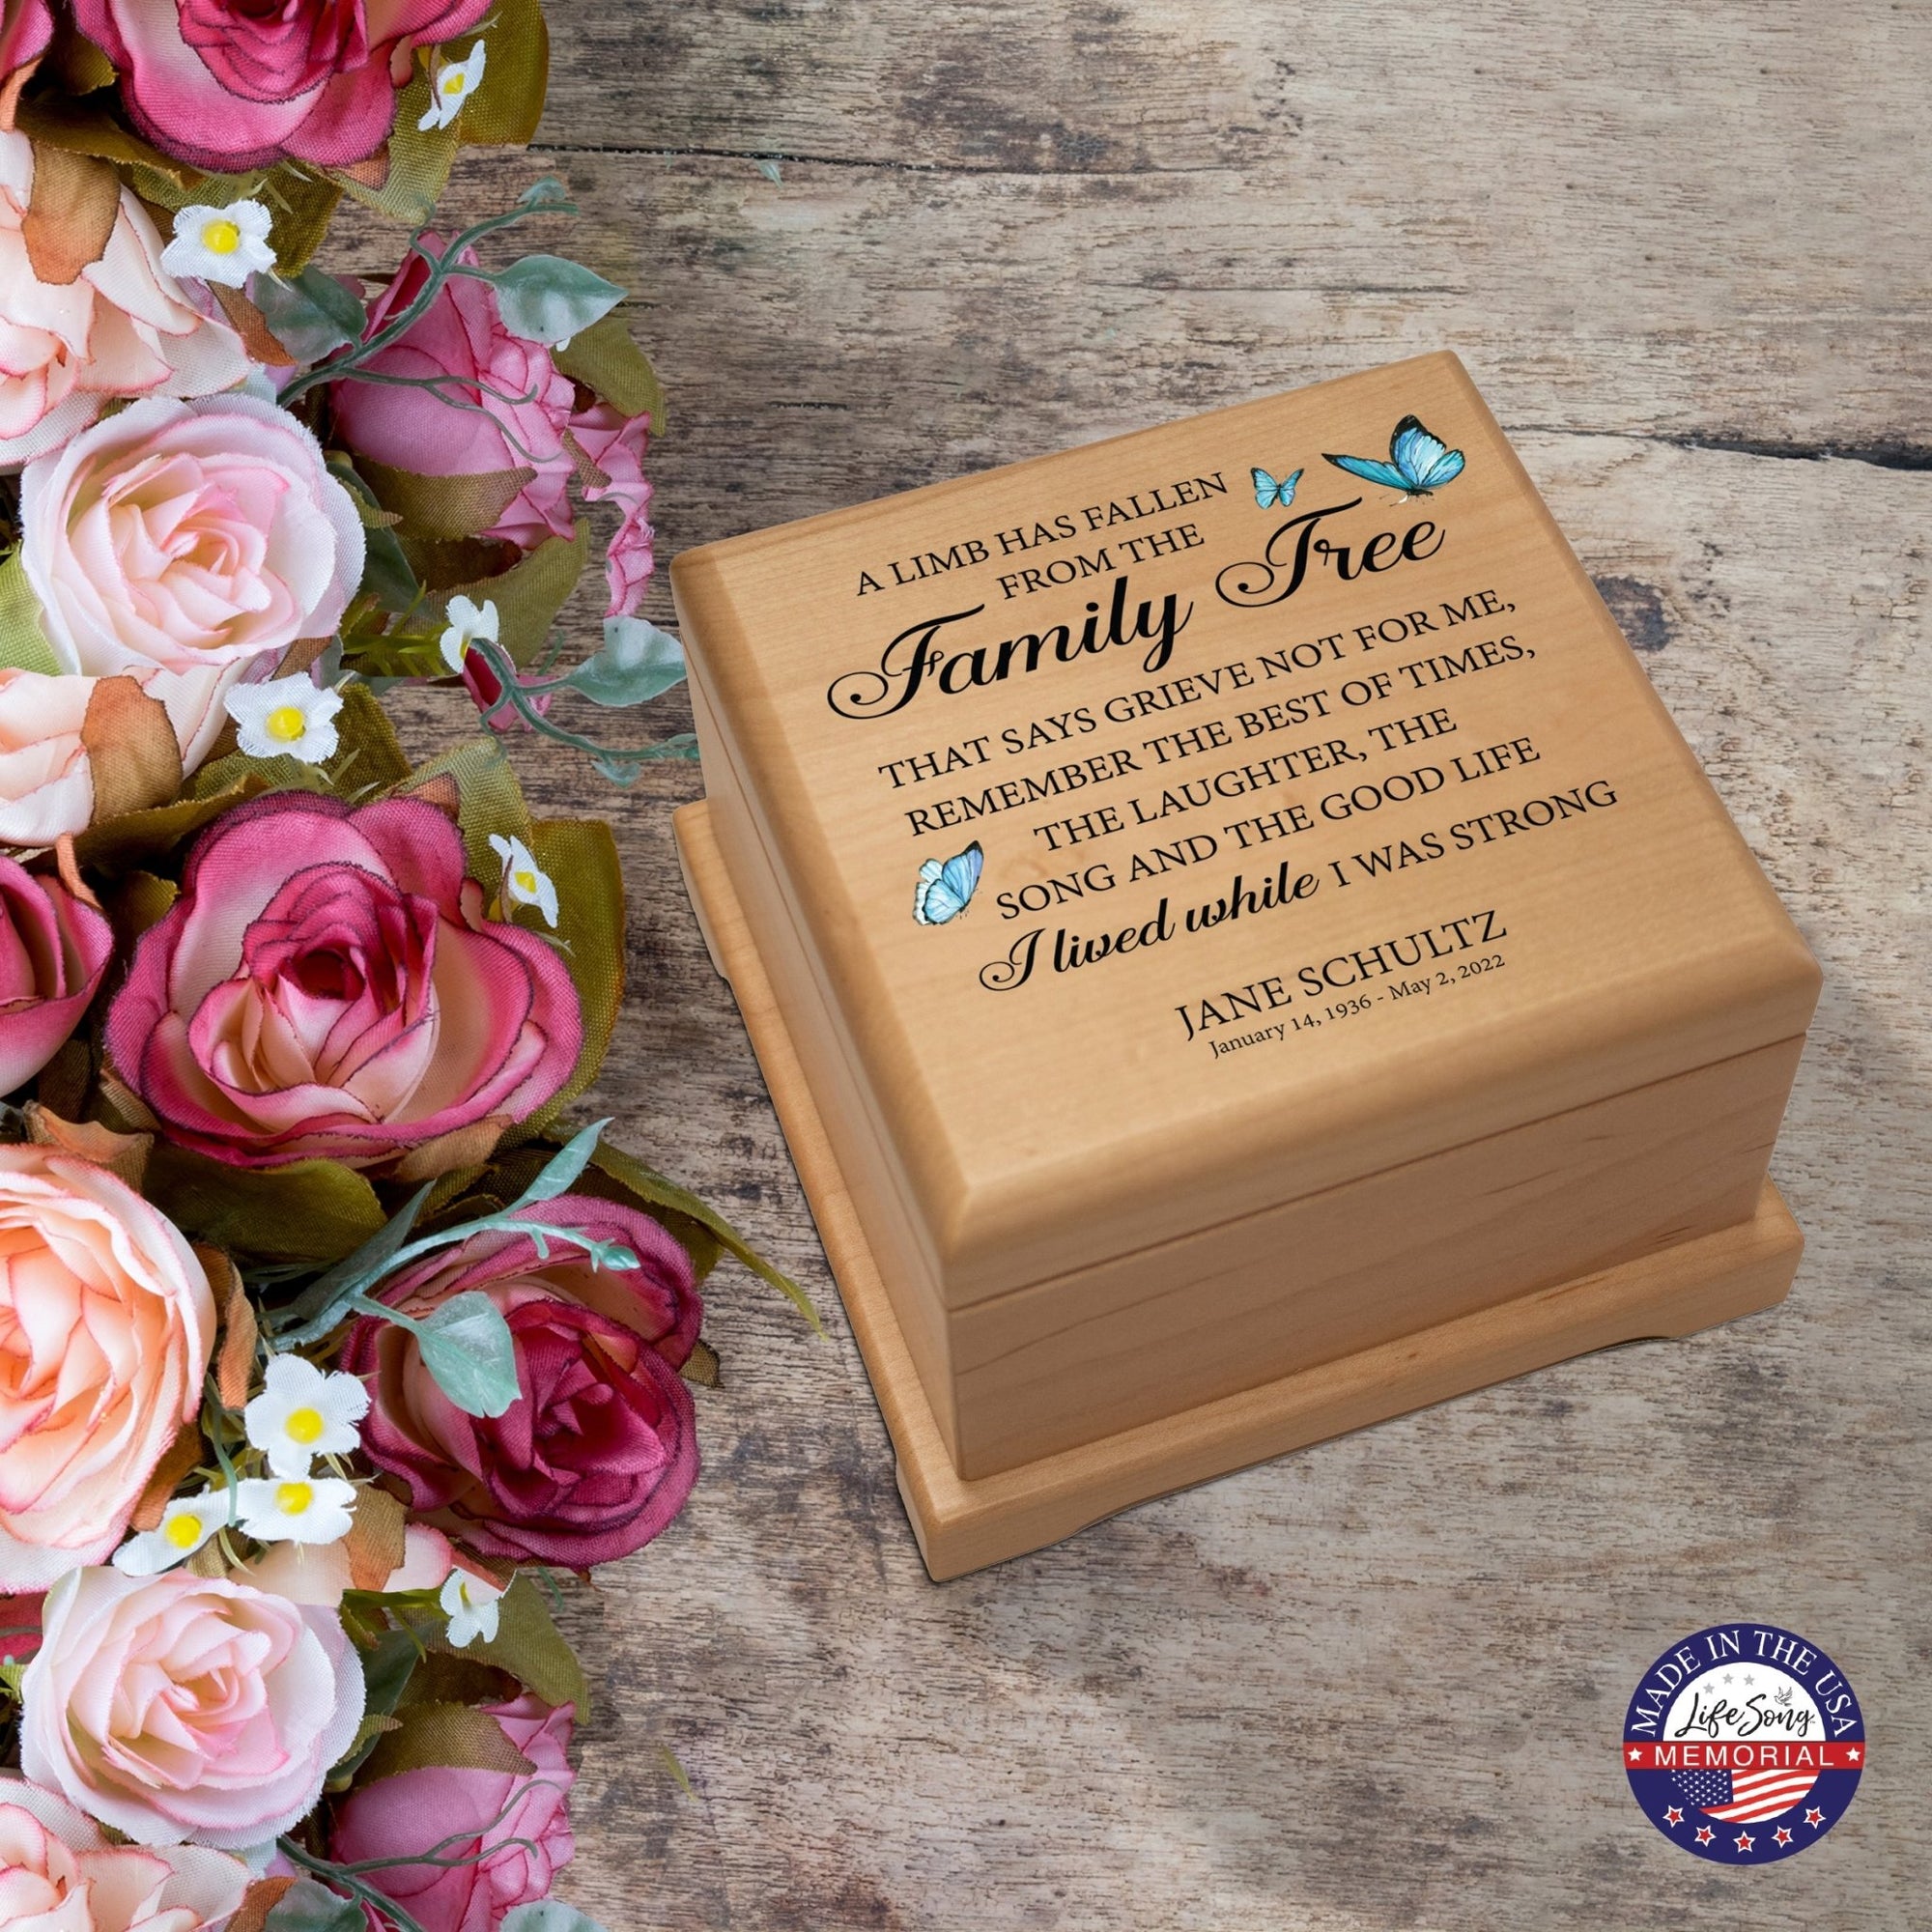 Personalized Memorial Cremation Wooden Keepsake Urn For Human Ashes - A Limb Has fallen - LifeSong Milestones